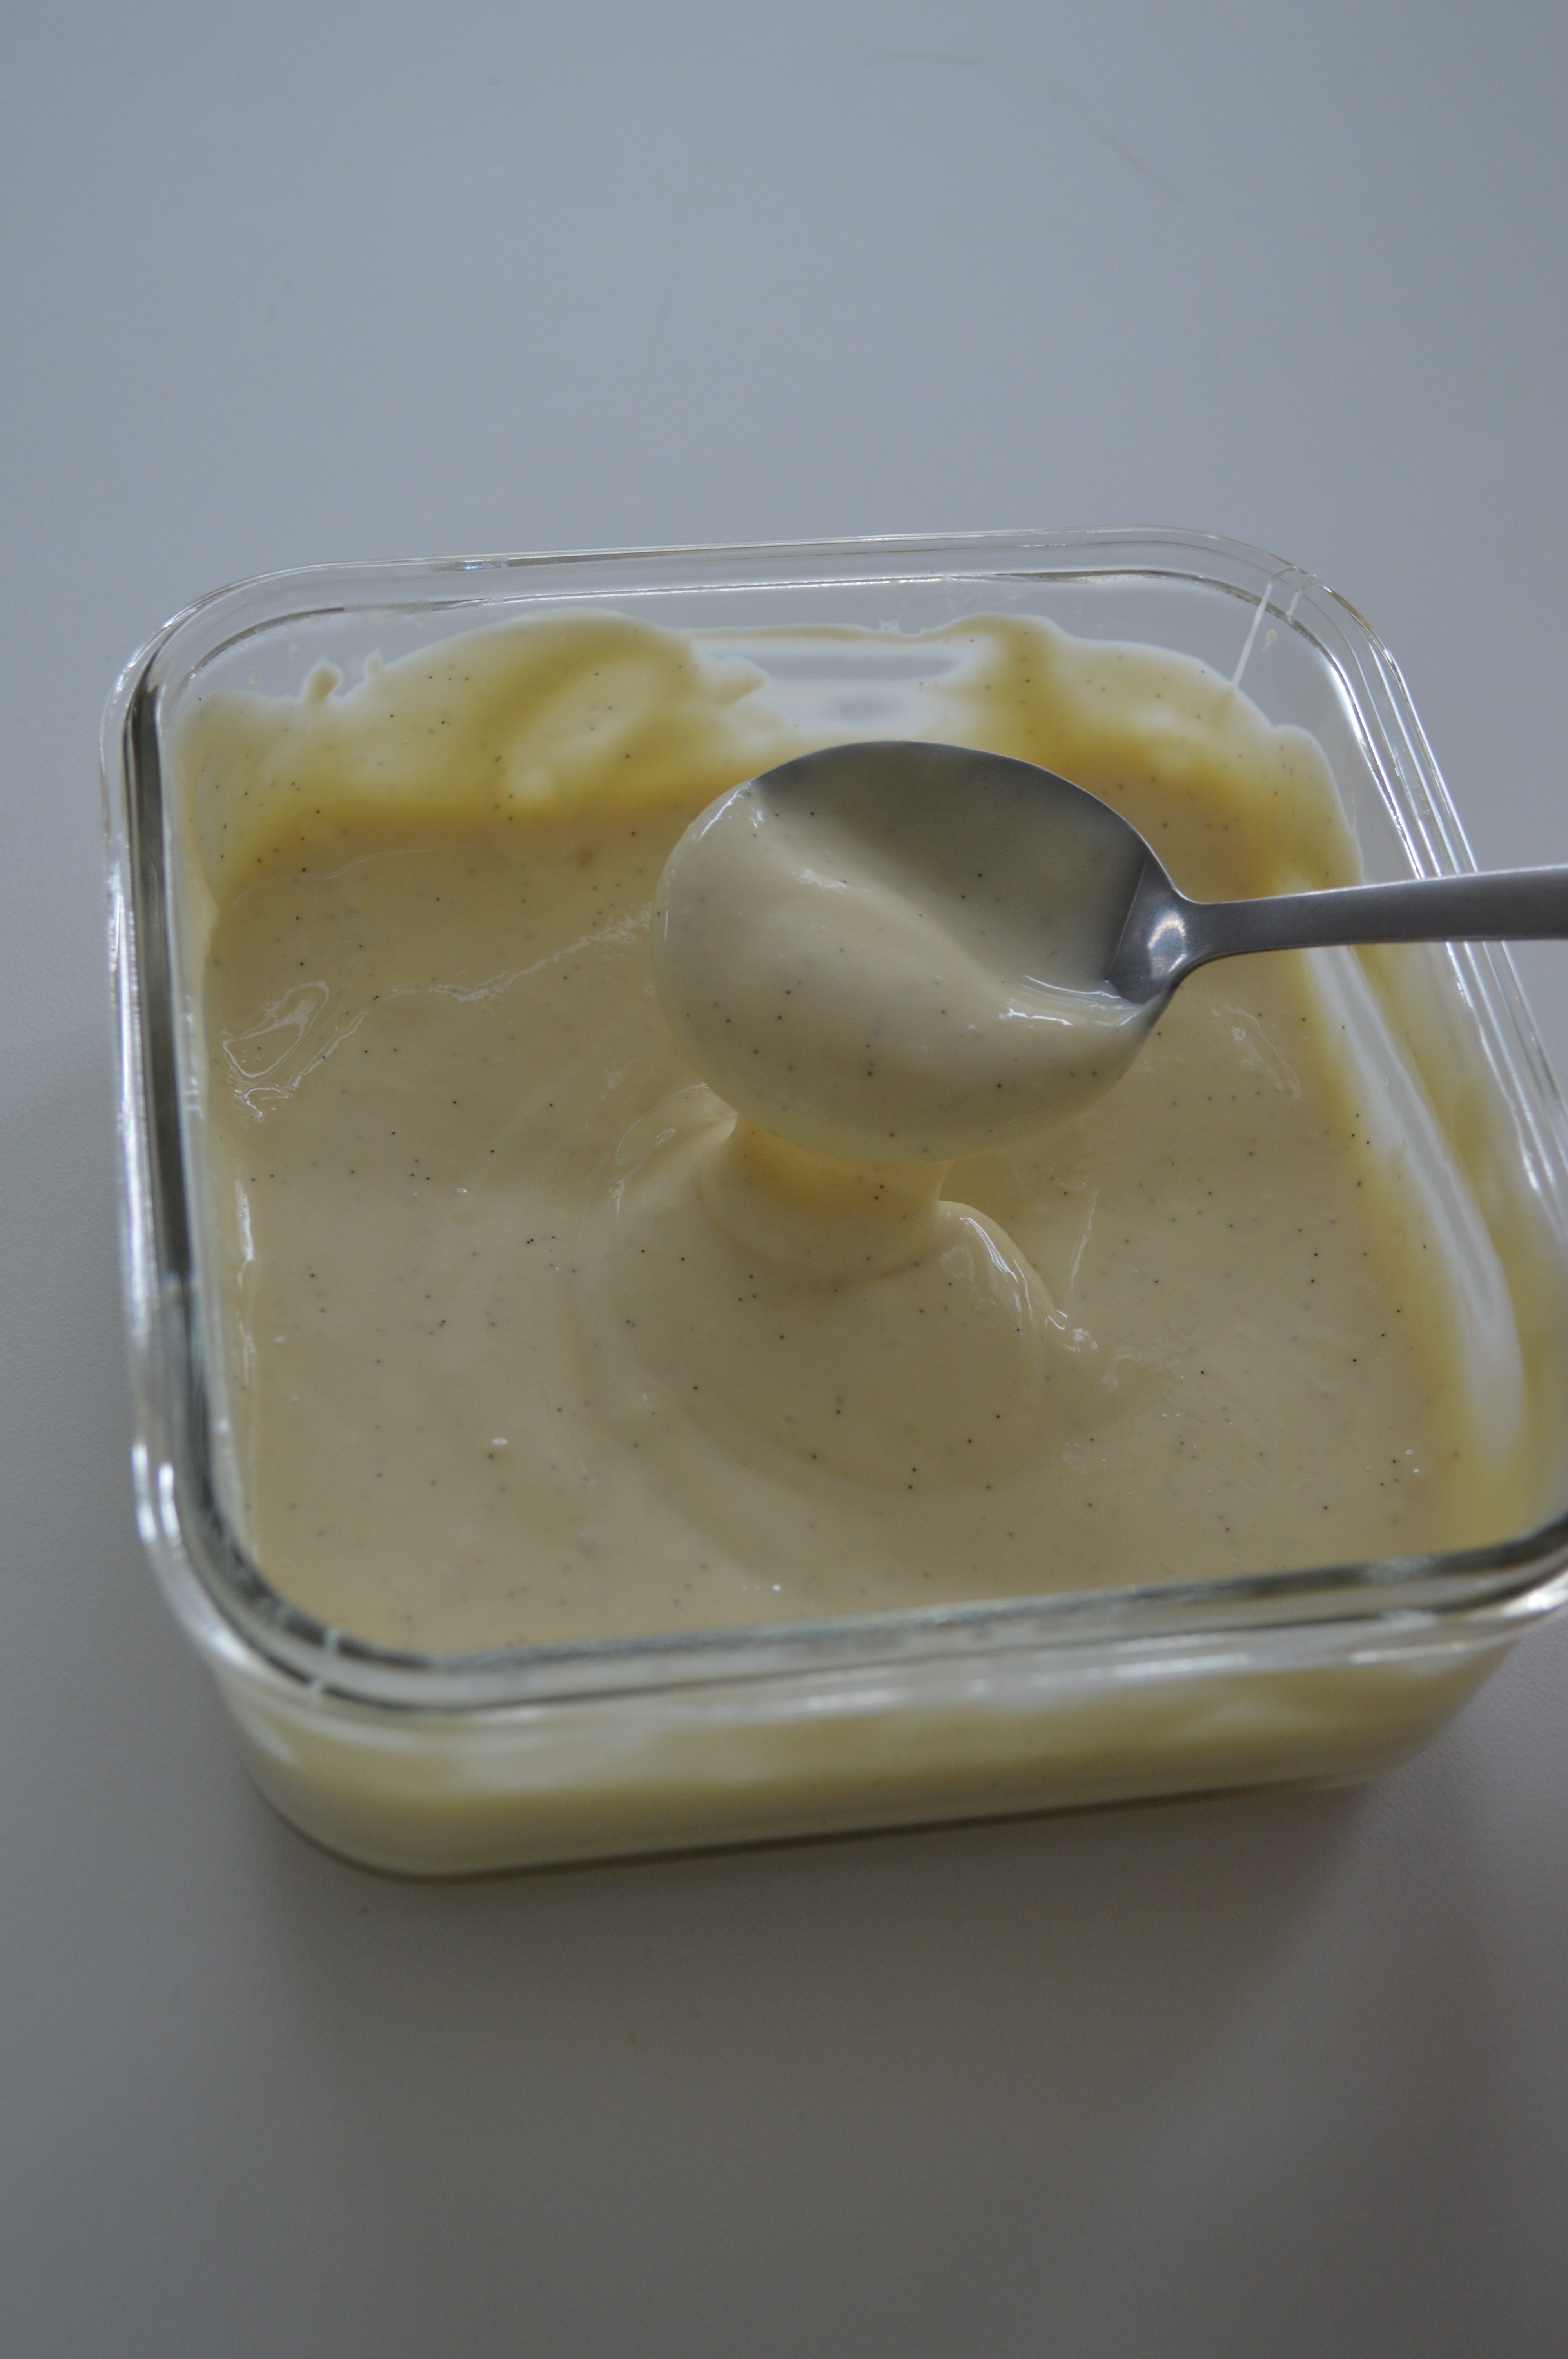 A bowl of pastry cream